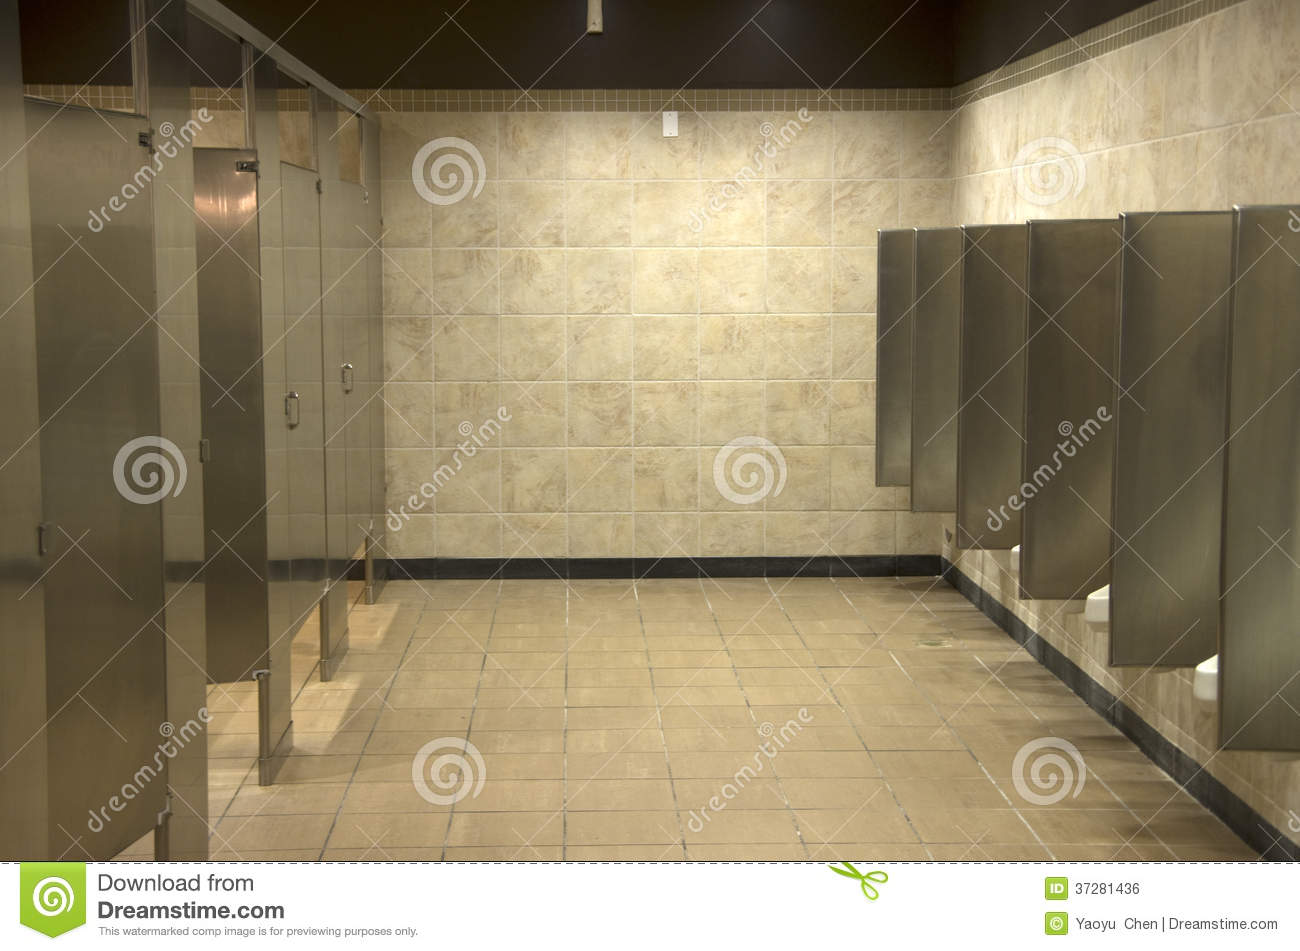 Clean And Simple Interiors Of A Bathroom In A Mall Mr No Pr No 3 362 5